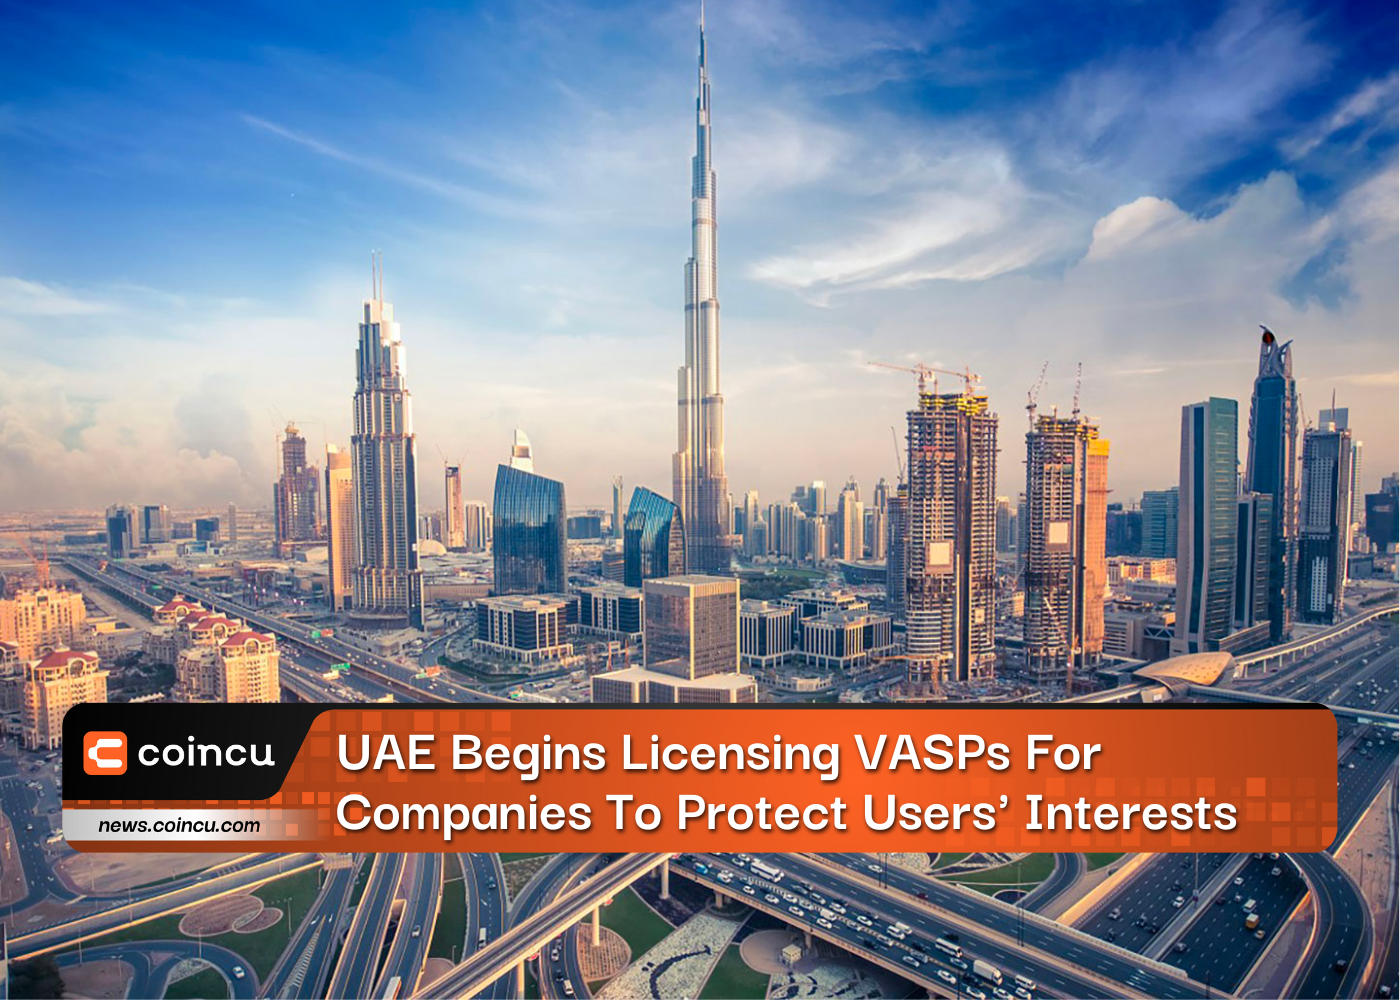 UAE Begins Licensing VASPs For Companies To Protect Users' Interests